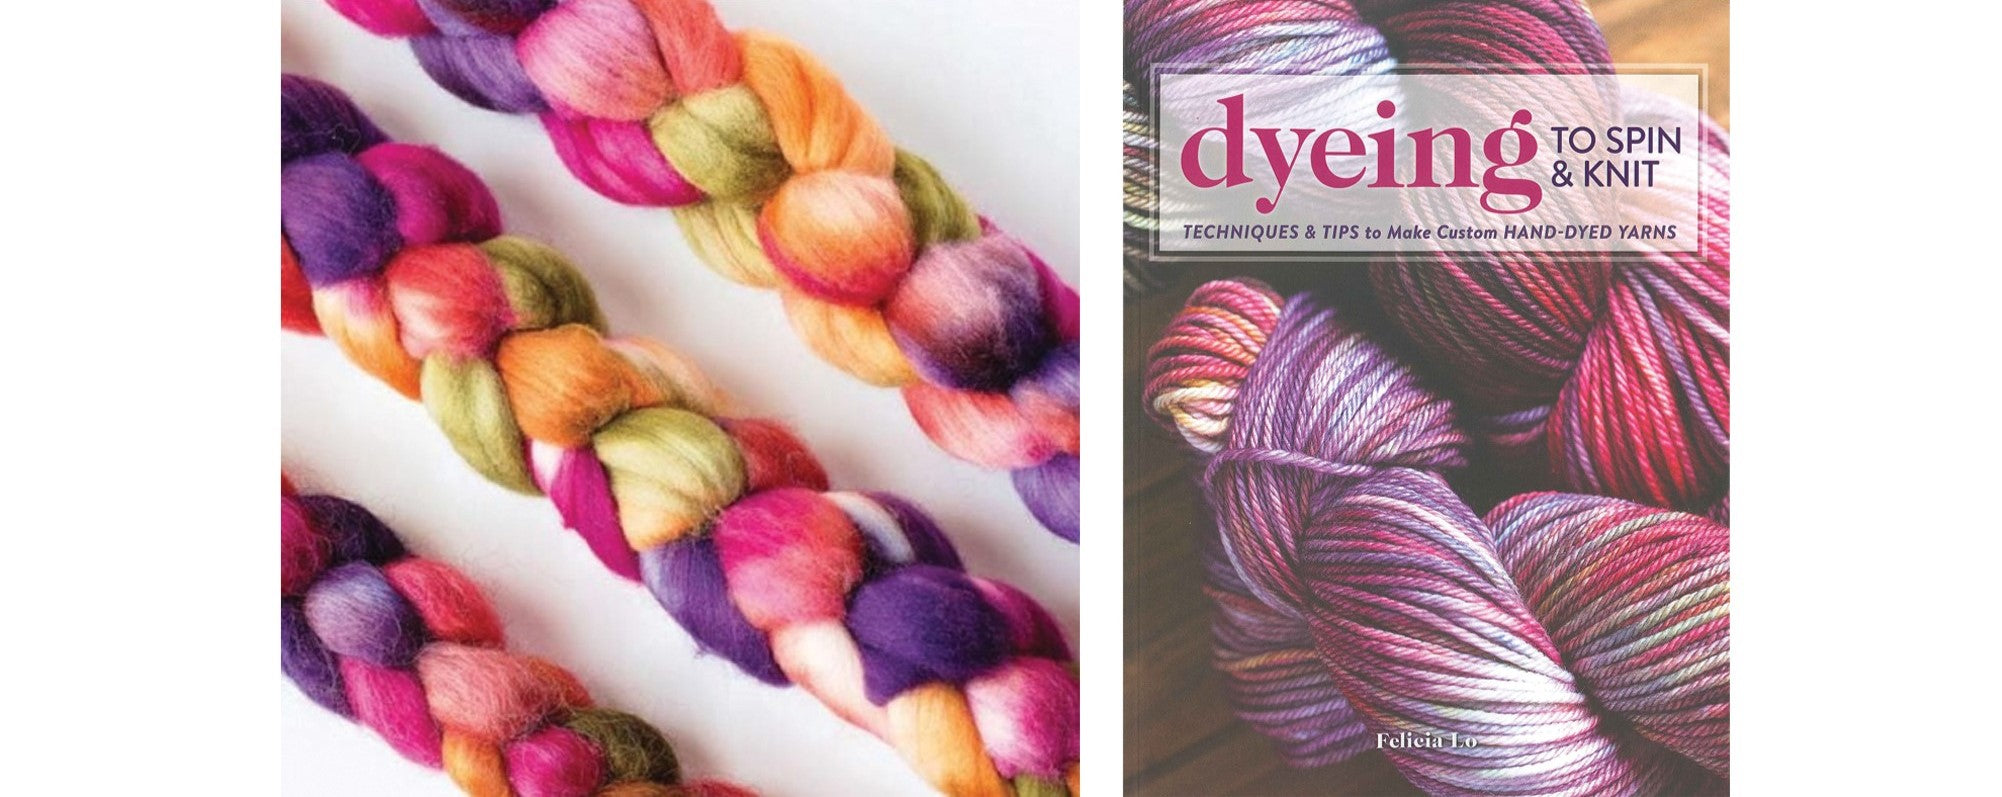 Felicia Lo on Dyeing to Spin and Knit